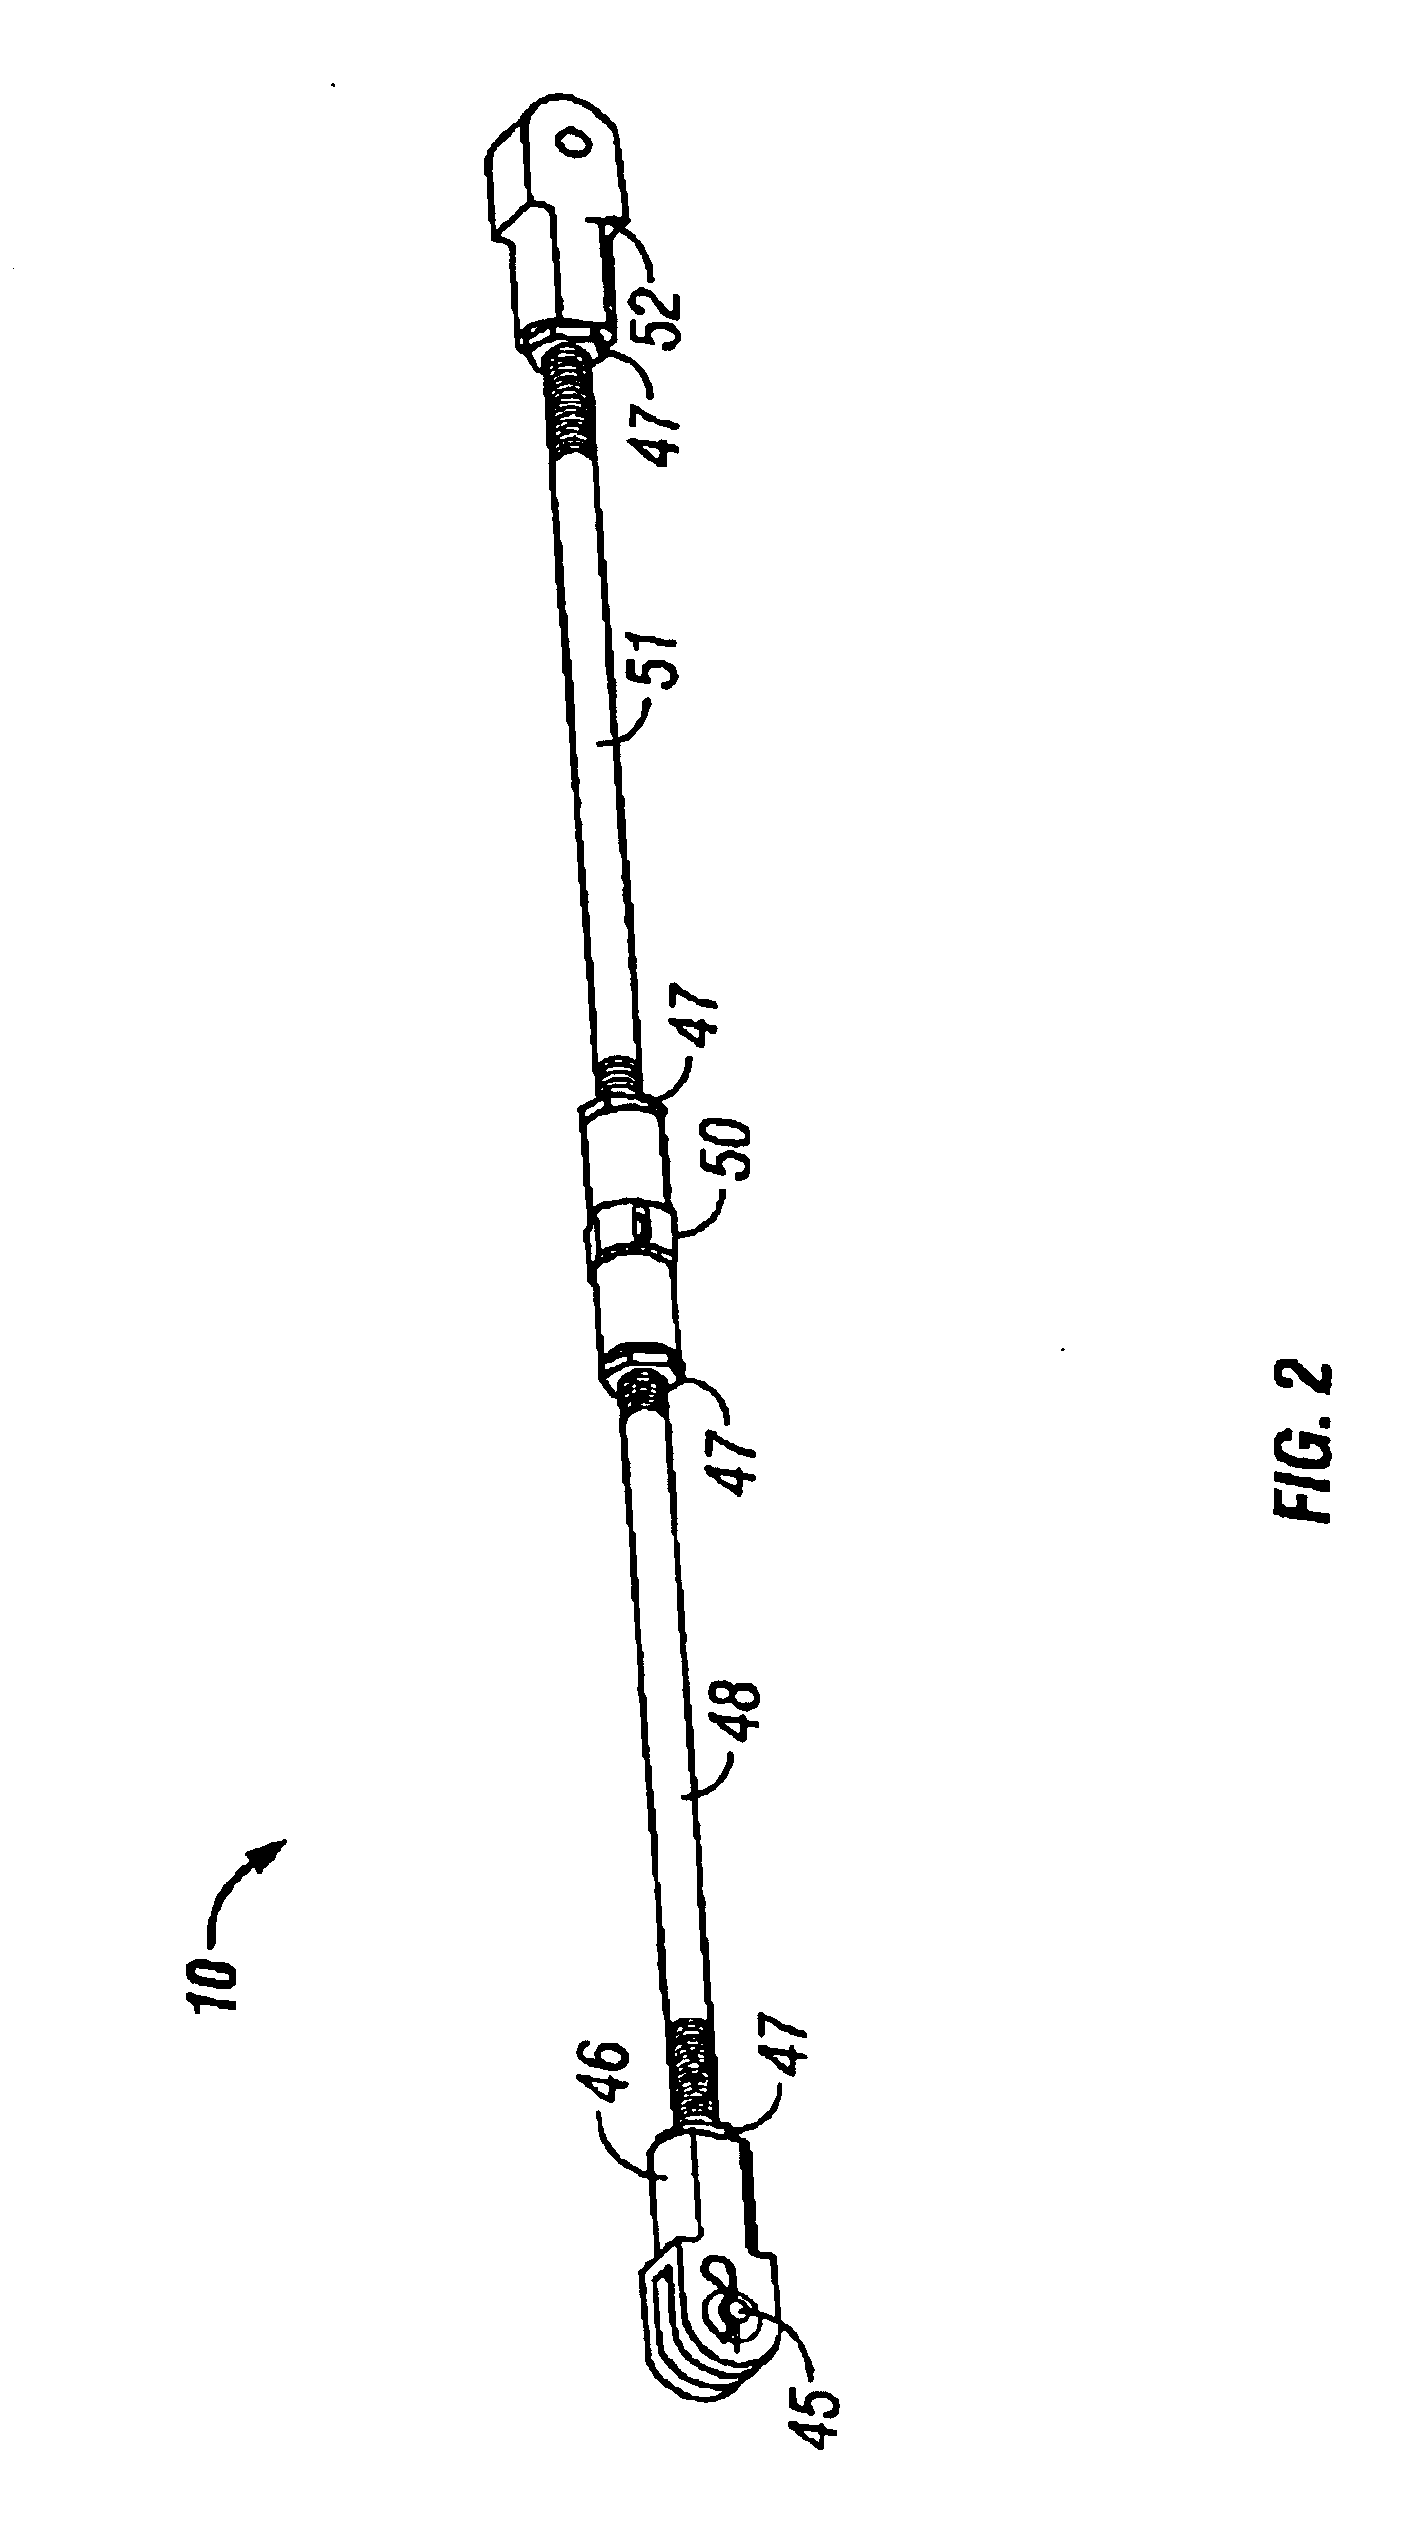 Universal top-drive wireline entry system bracket and method